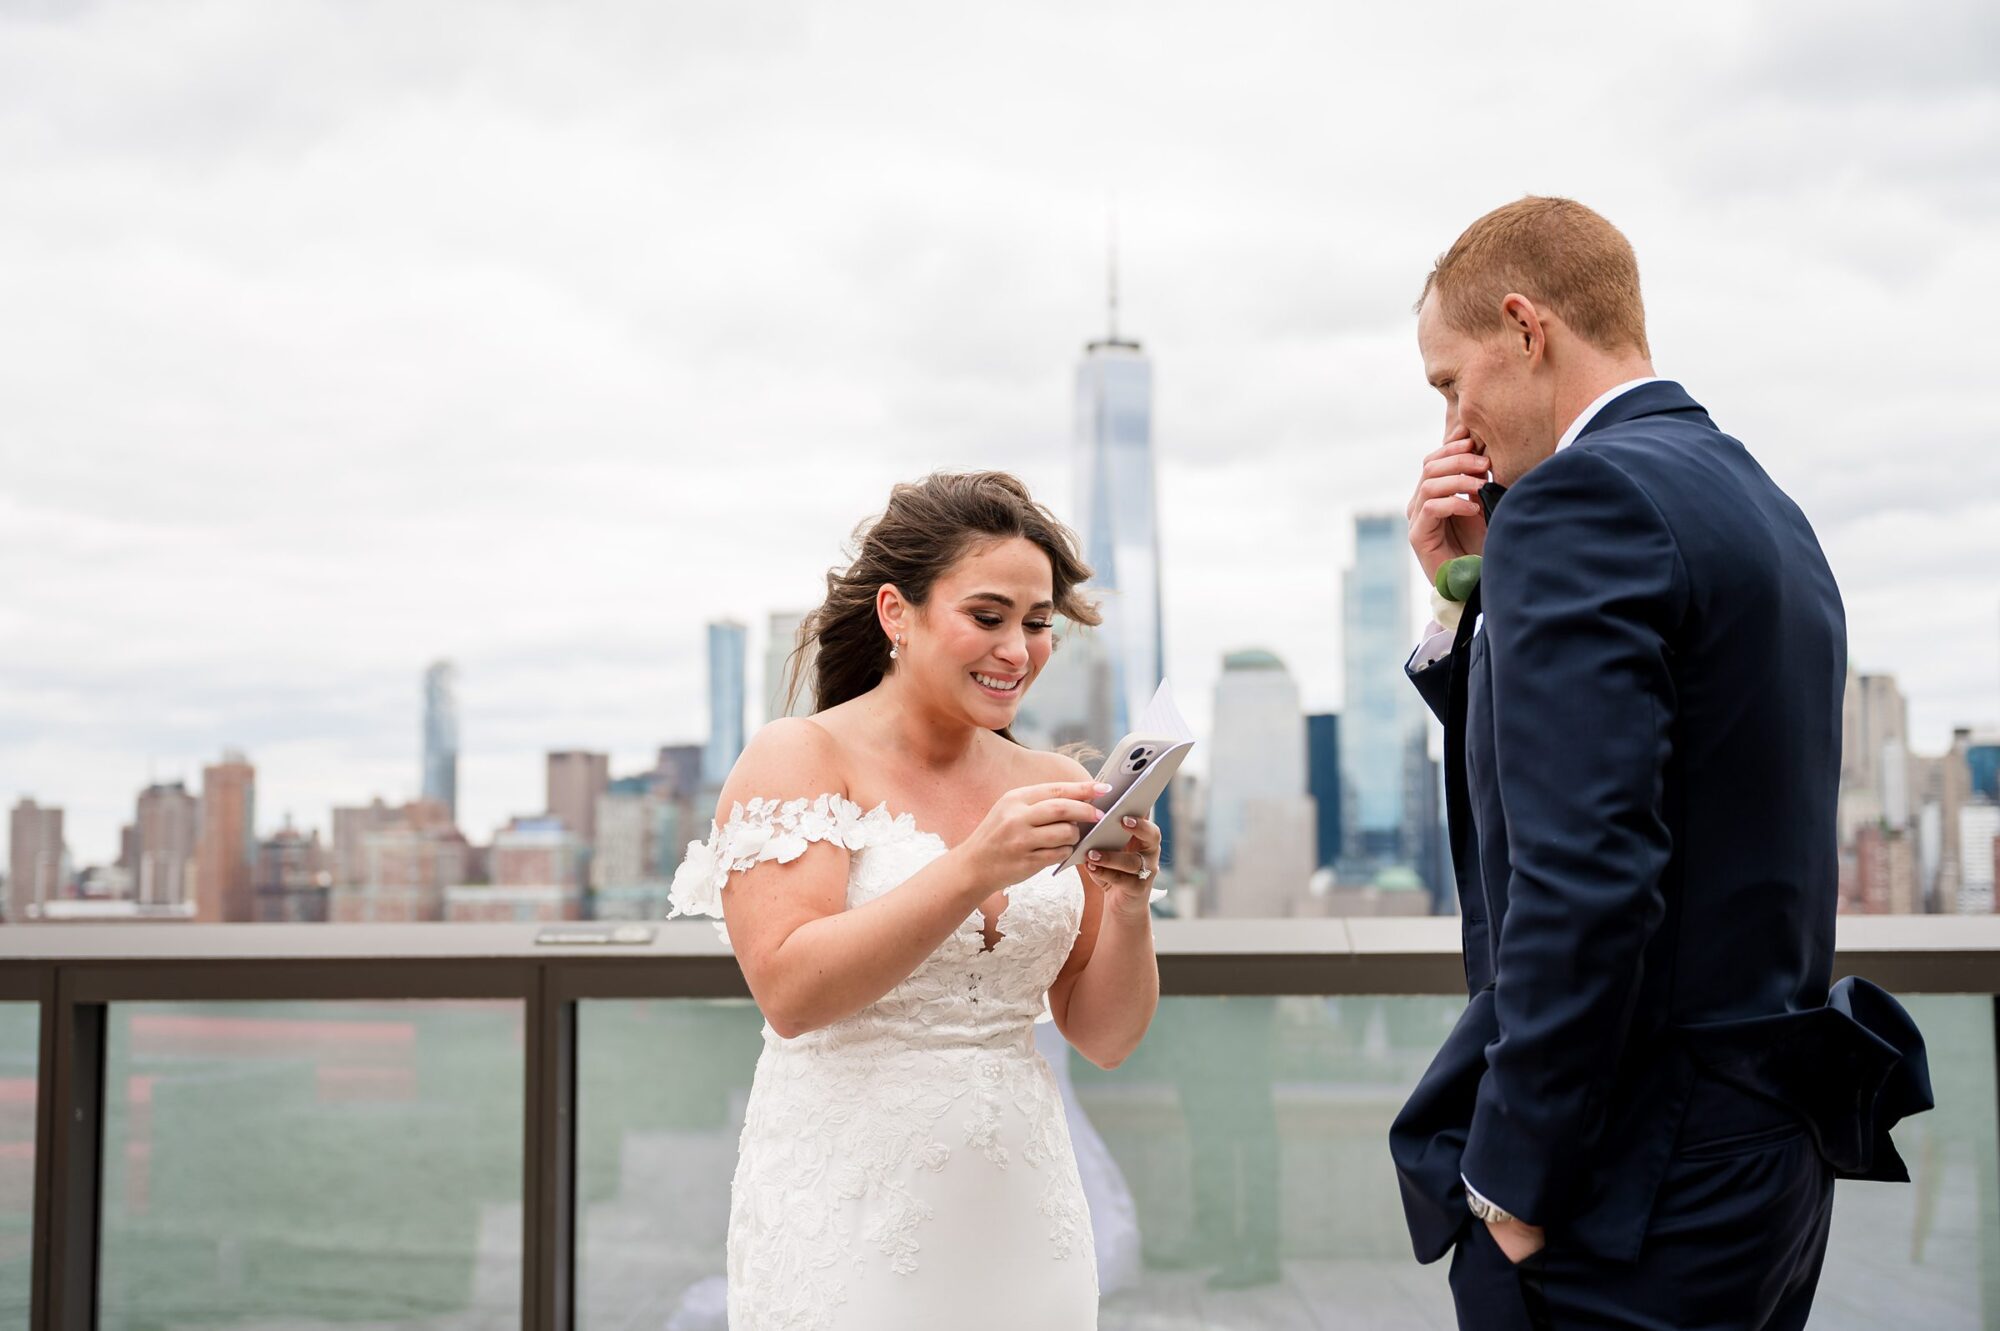 A bride and groom looking at their phone on a rooftop in nyc.